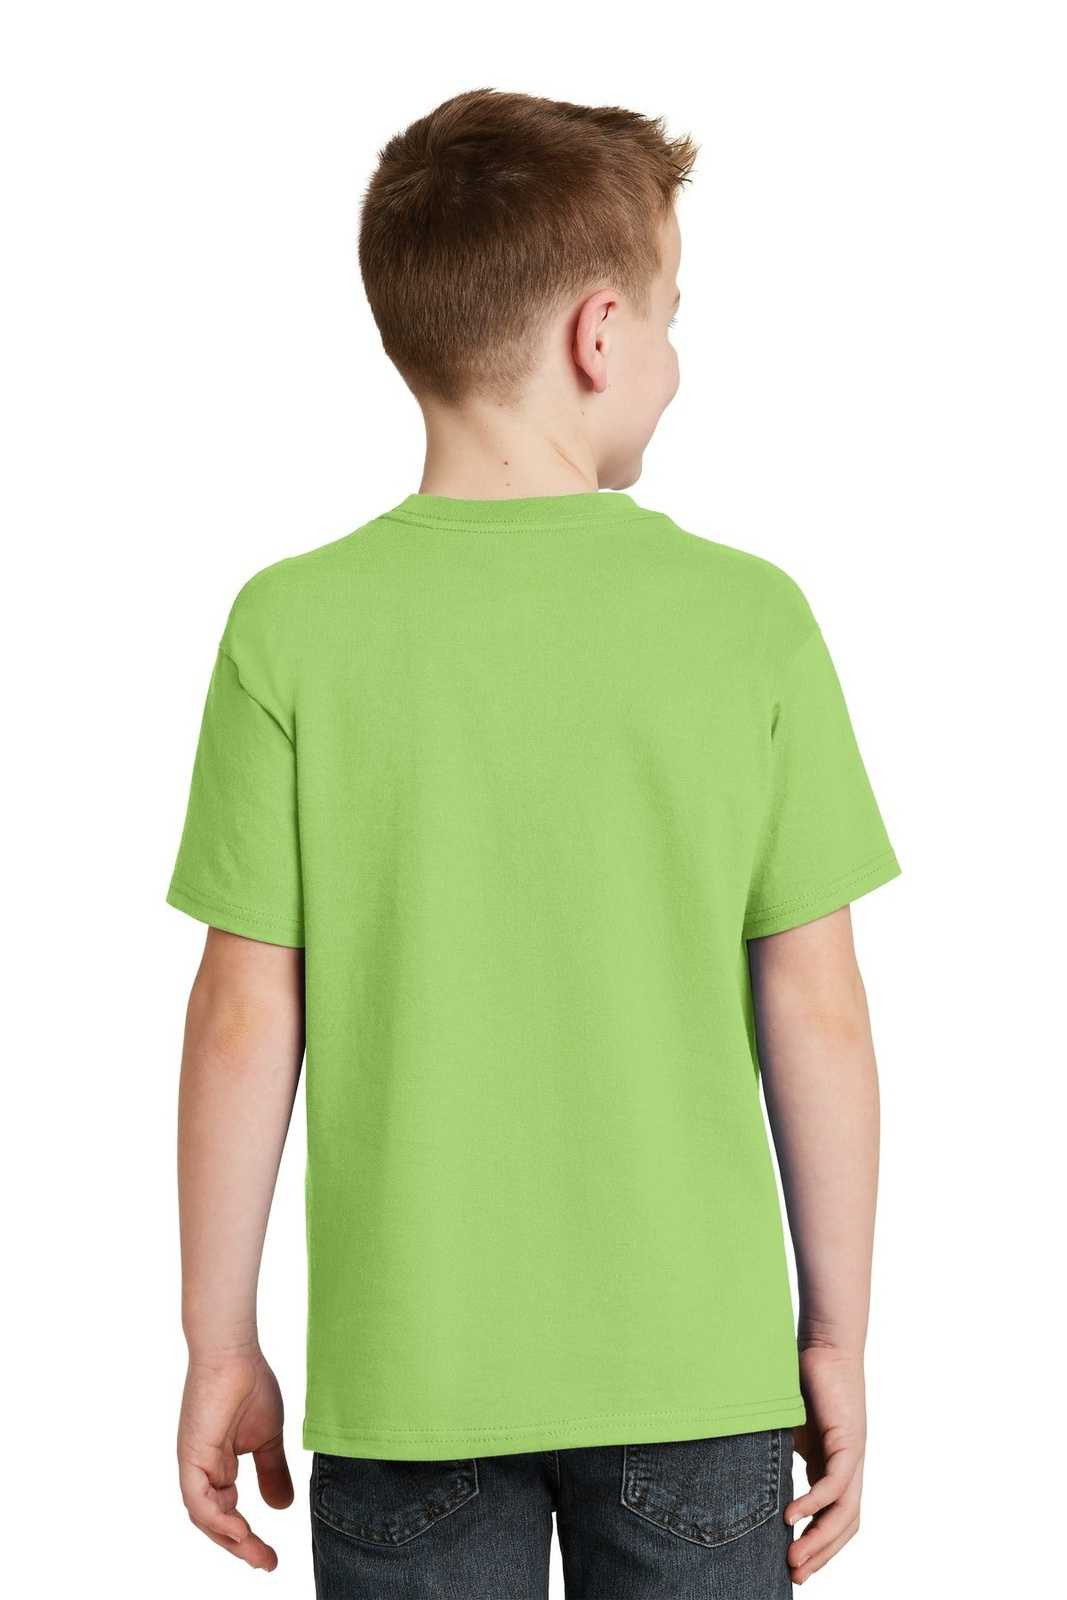 Hanes 5450 Youth Tagless 100% Cotton T-Shirt - Lime - HIT a Double